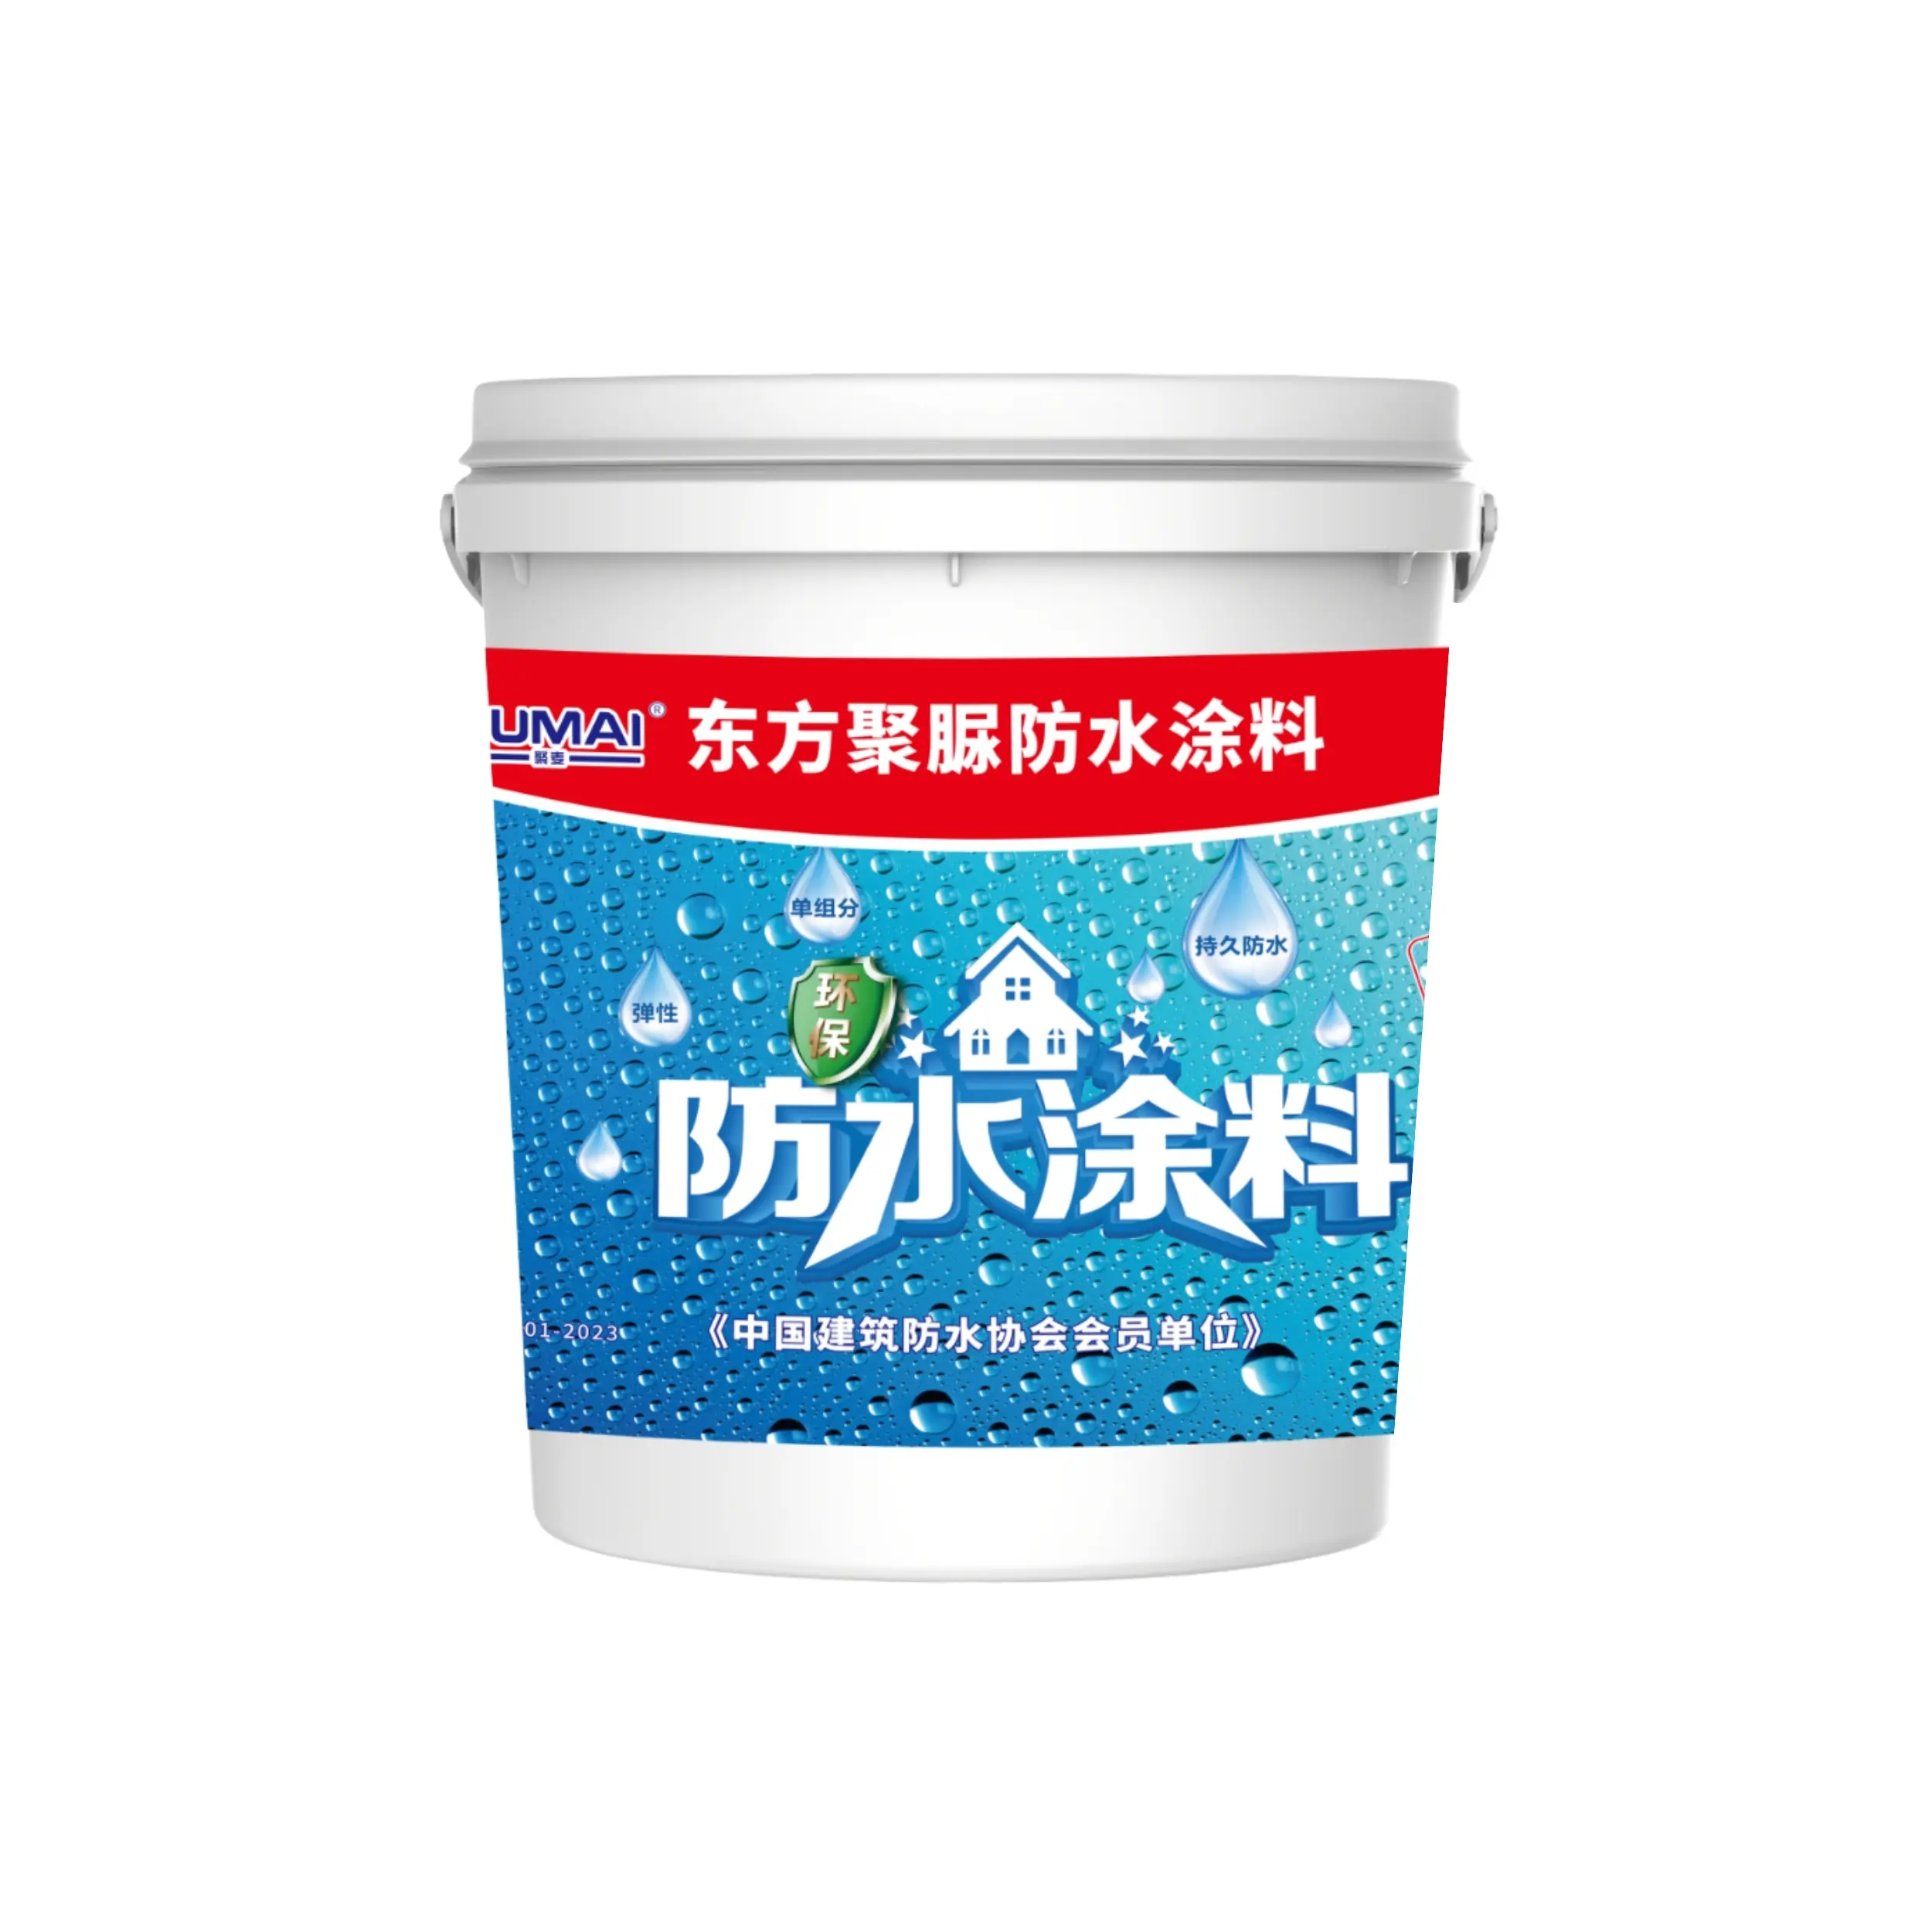 Factory Direct Waterproof Coating   Paint For Roof  Exterior Wall  Color Steel Tile  Flooring and Outdoor